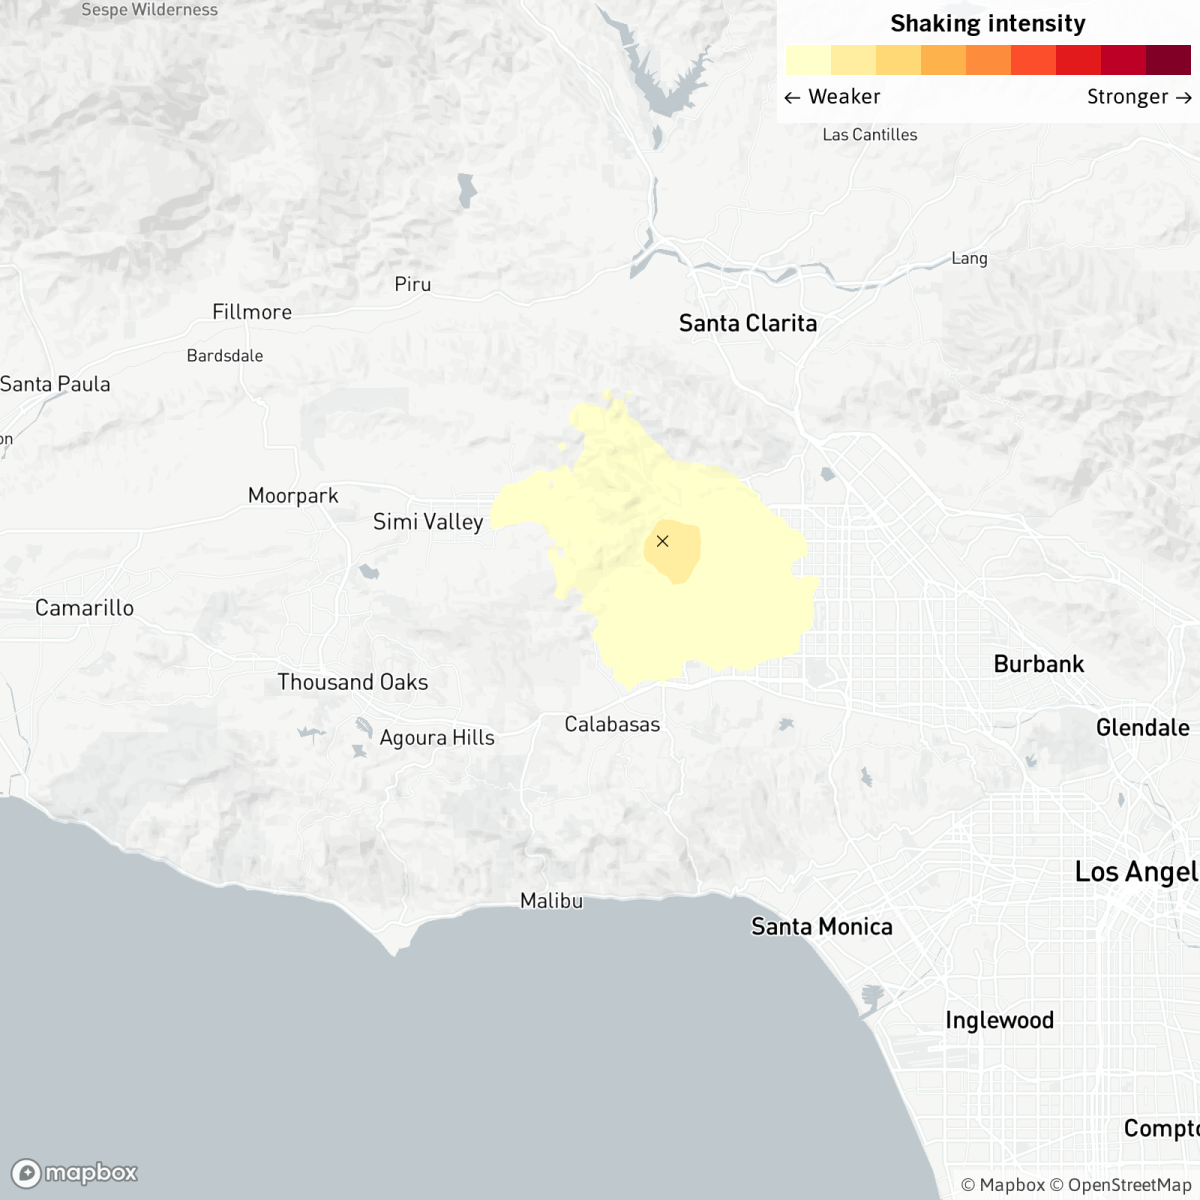 A magnitude 3.2 earthquake was reported Sunday afternoon at 2:45 p.m. Pacific time in Los Angeles, according to the U.S. Geological Survey.